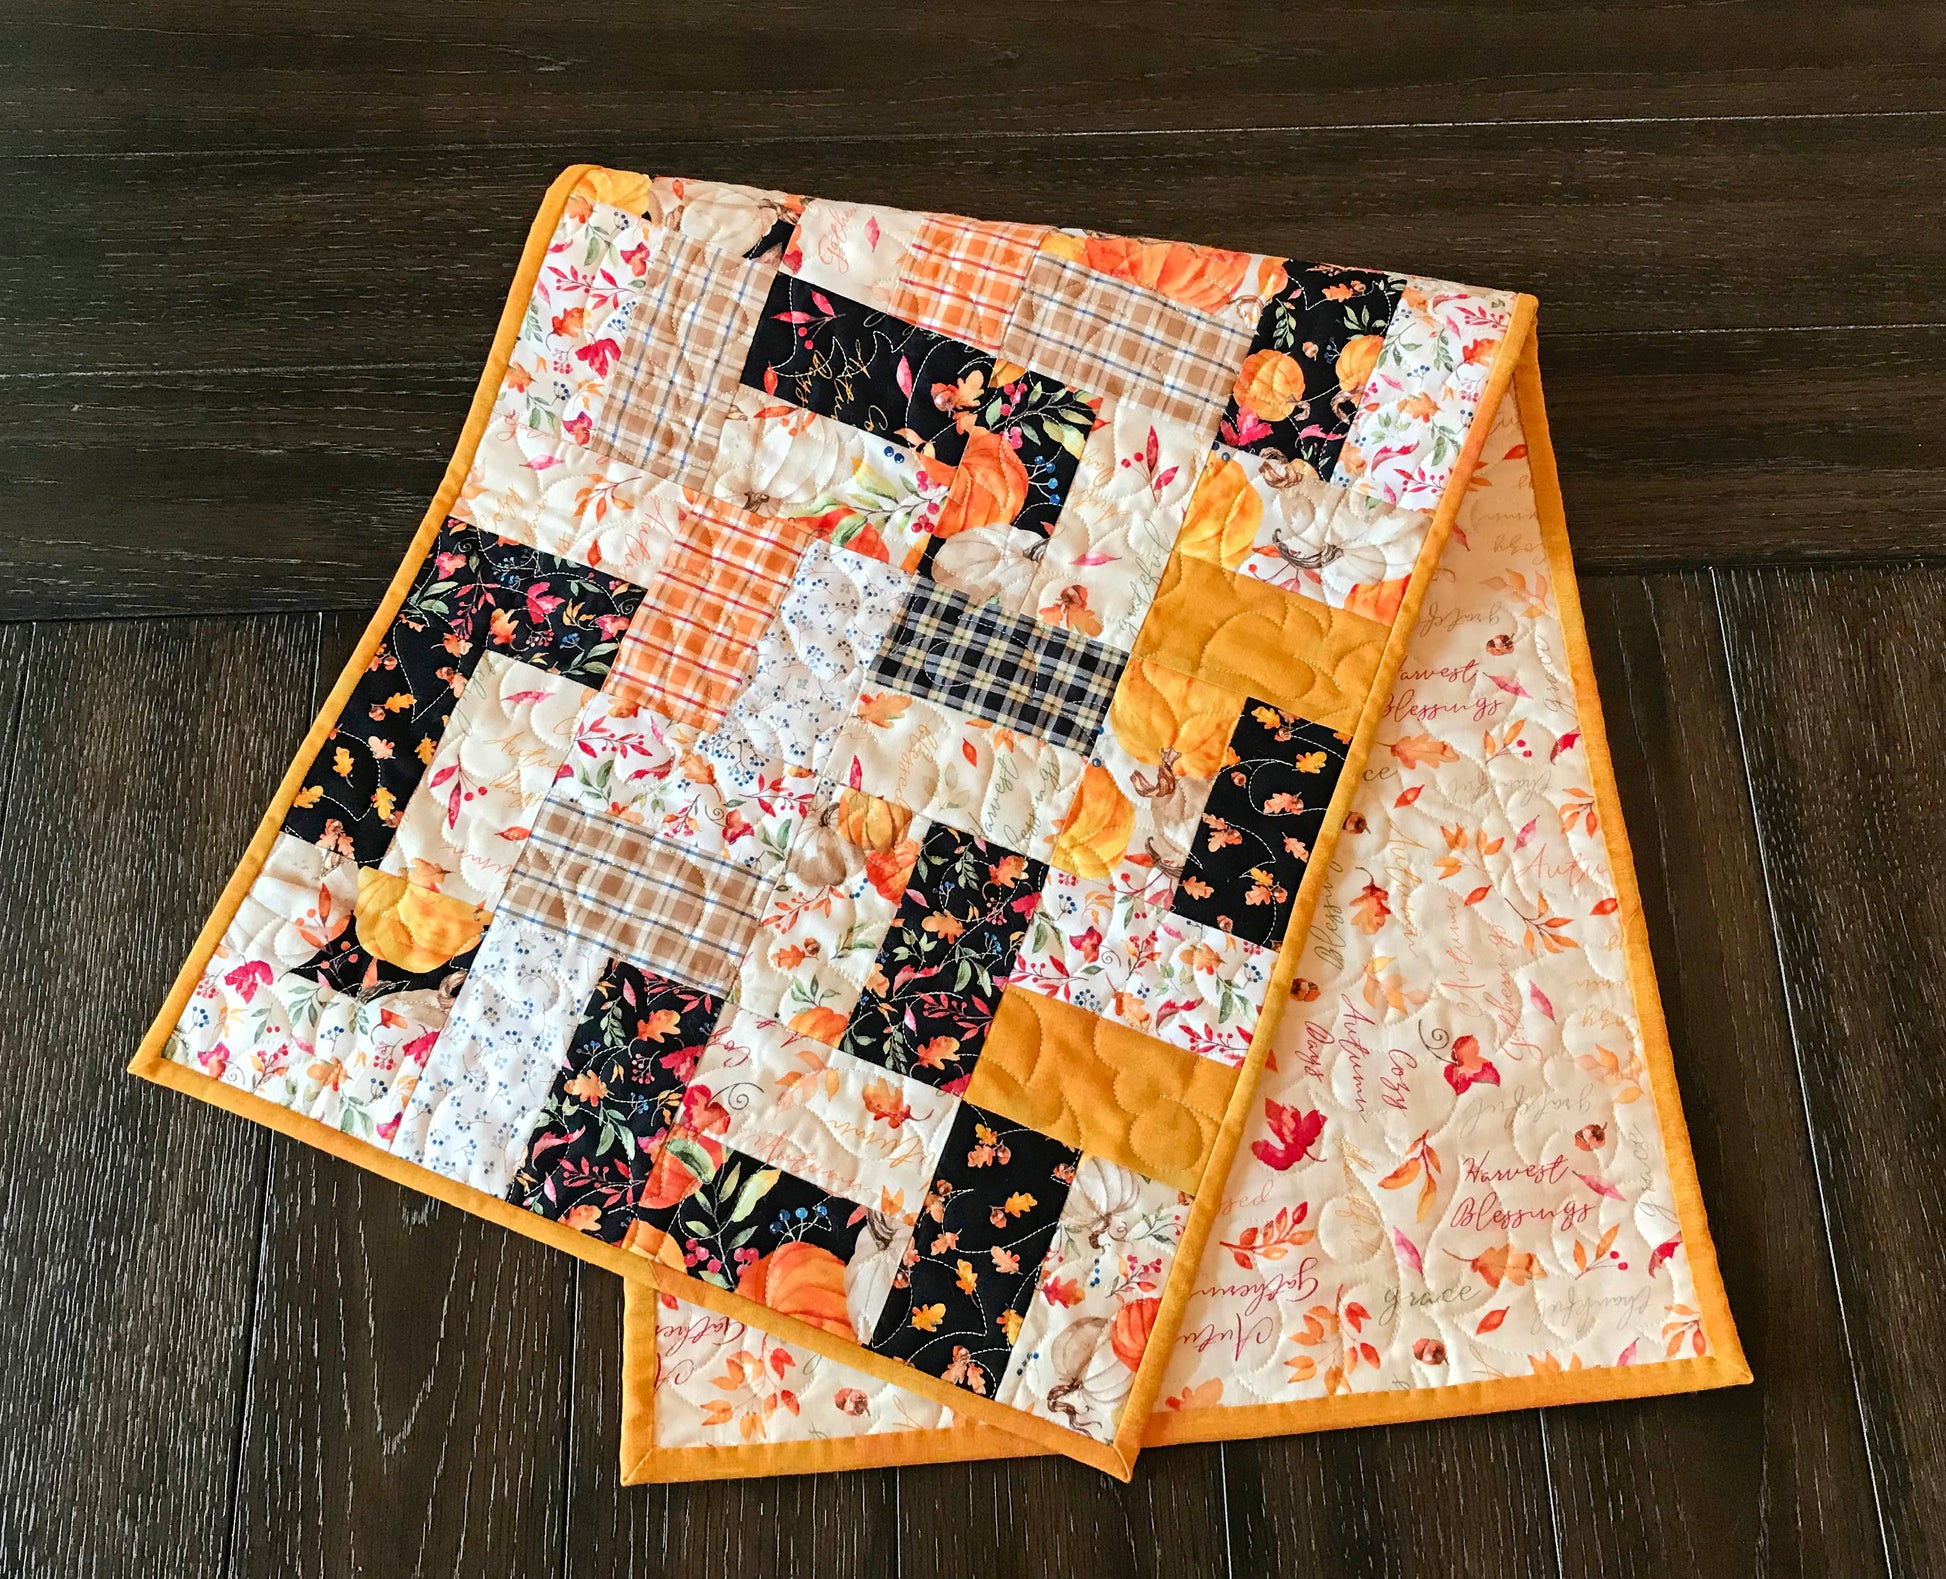 Garden Path Table Runner Pattern for Charm Squares - Digital Pattern - Handmade Quilts, Digital Patterns, and Home Décor items online - Cuddle Cat Quiltworks